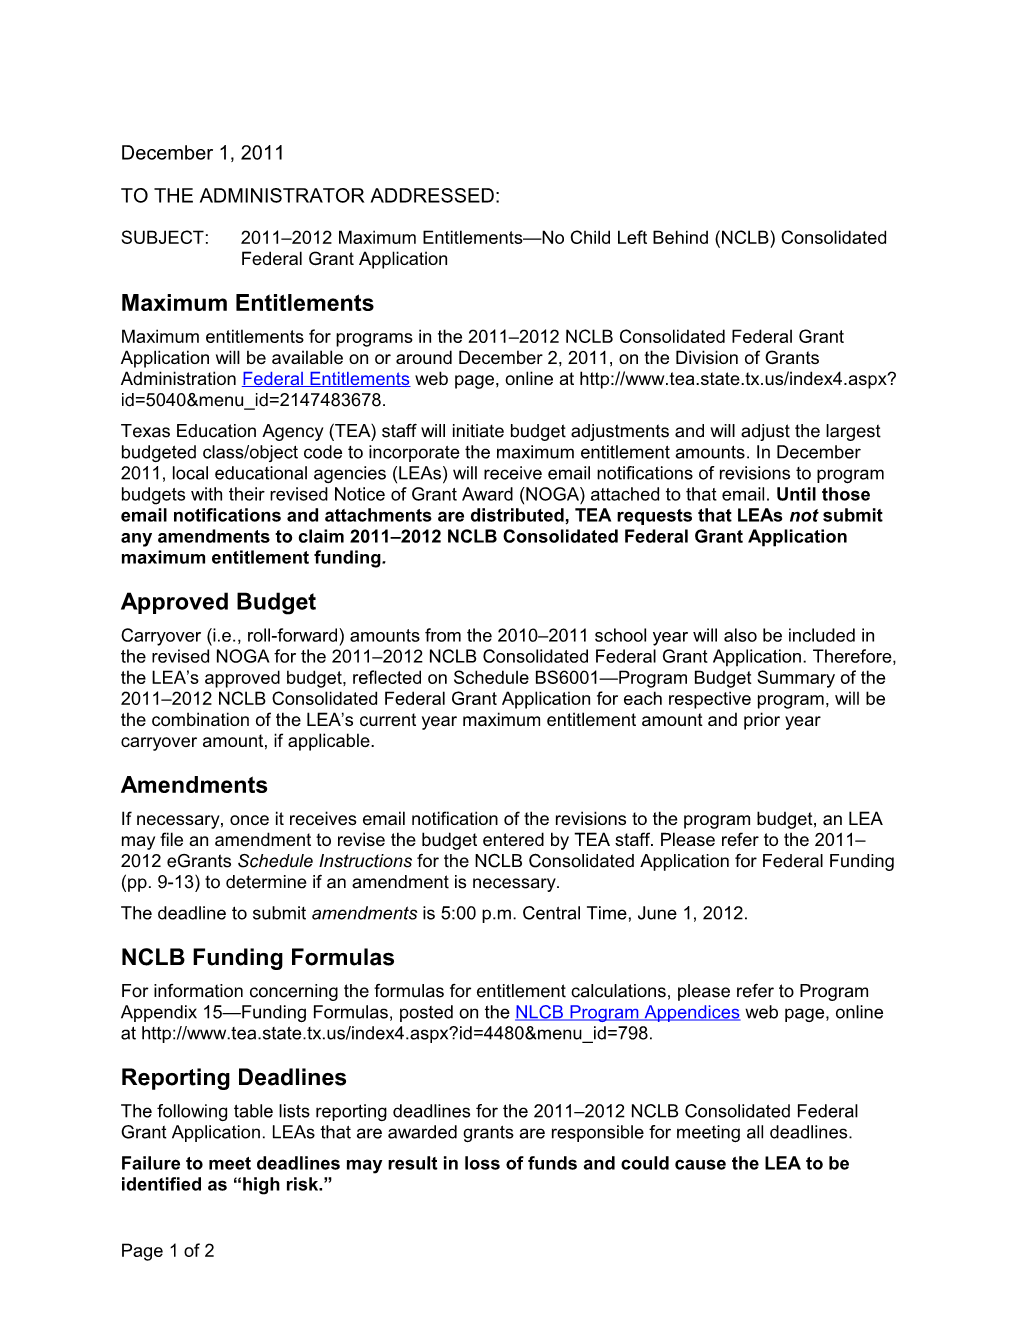 SUBJECT:2011 2012Maximum Entitlements No Child Left Behind (NCLB) Consolidated Federal